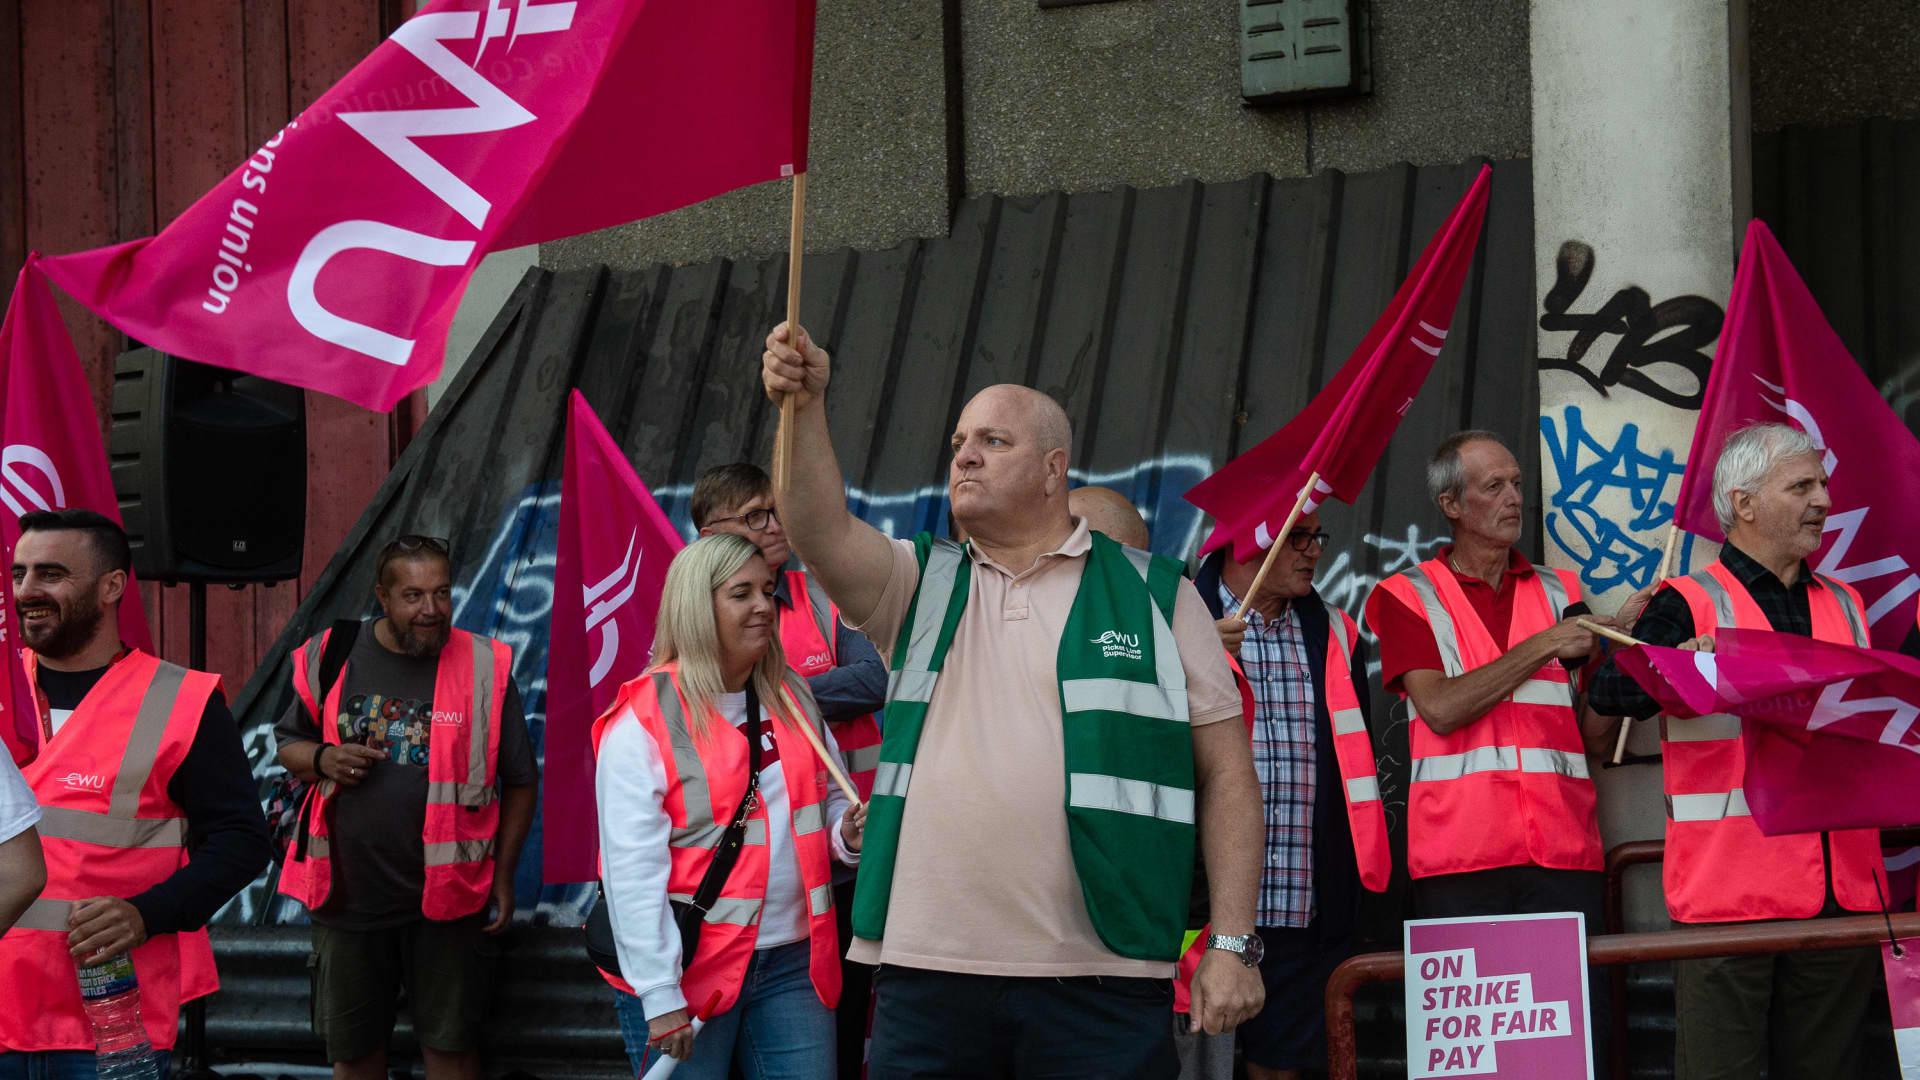 Postal workers have recently gone on strike as Britain’s cost chaos continues